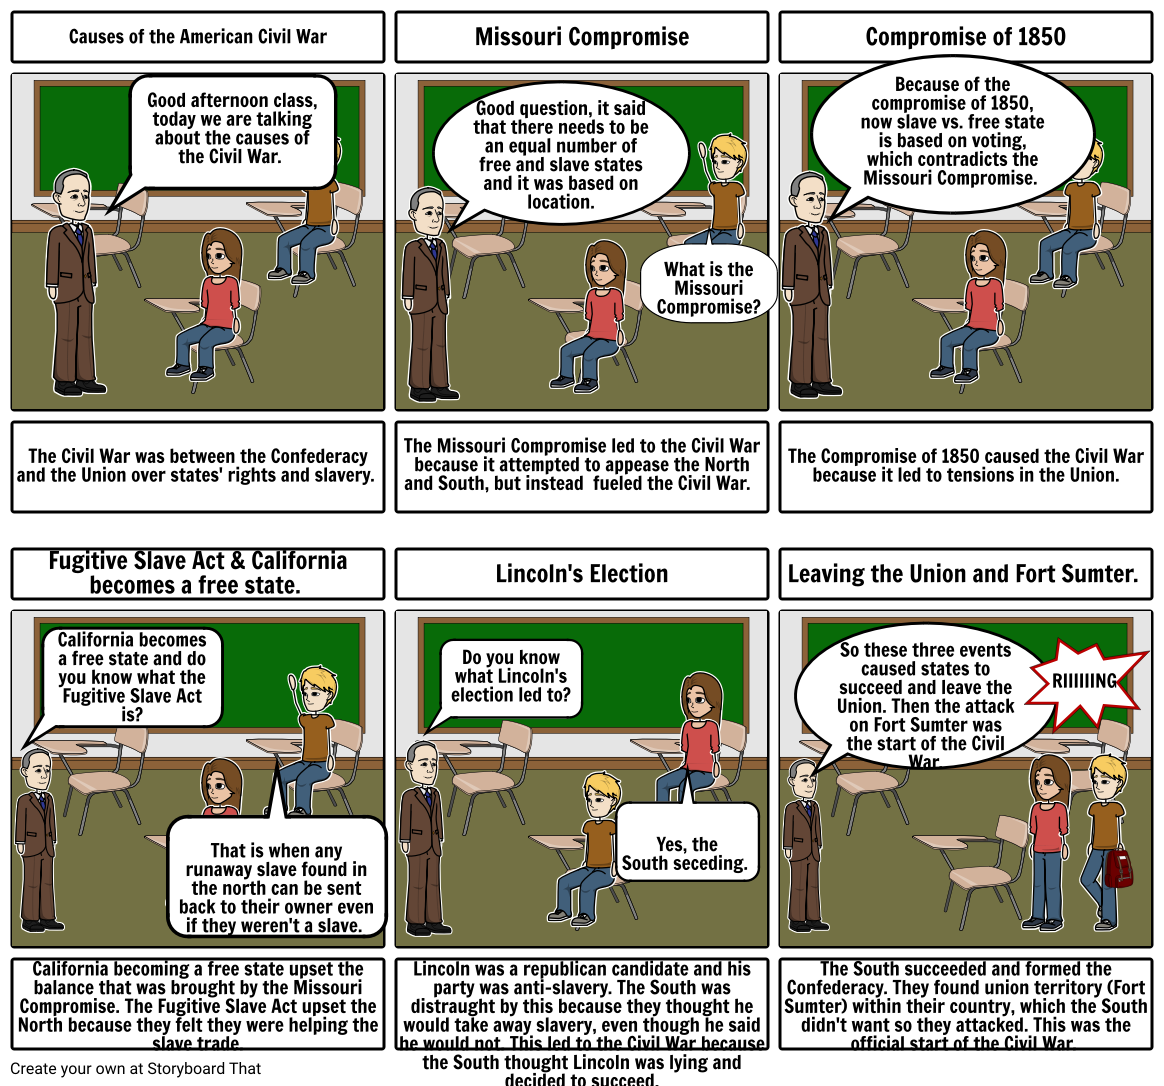 5 Causes of the American Civil War Storyboard by zieal01